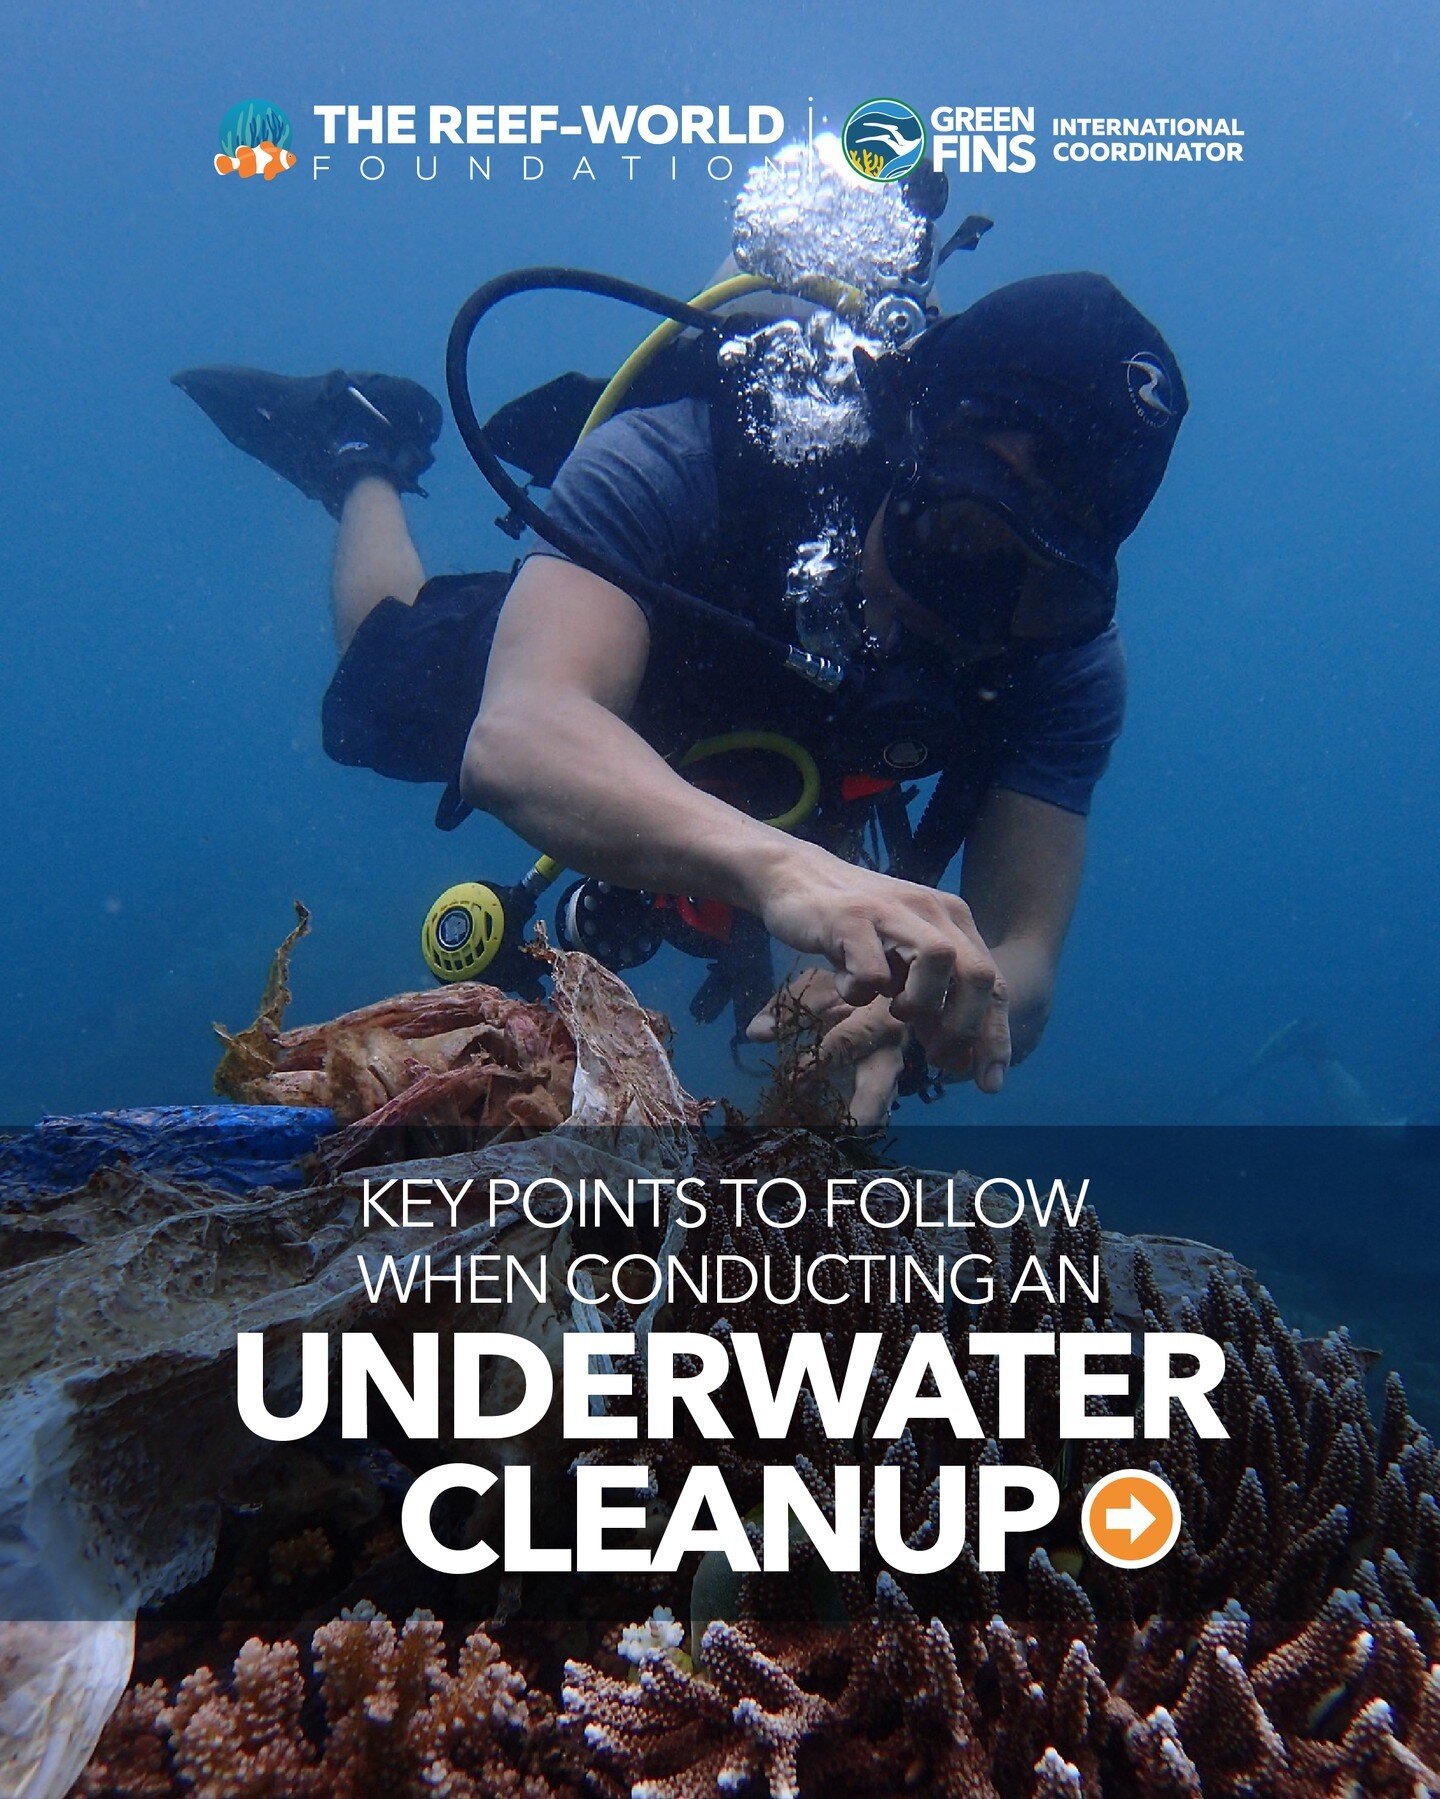 If the last post inspired you to join or organise a cleanup event, here are some key points to follow when conducting an underwater cleanup.

Do you join in underwater cleanups on your dive holidays?